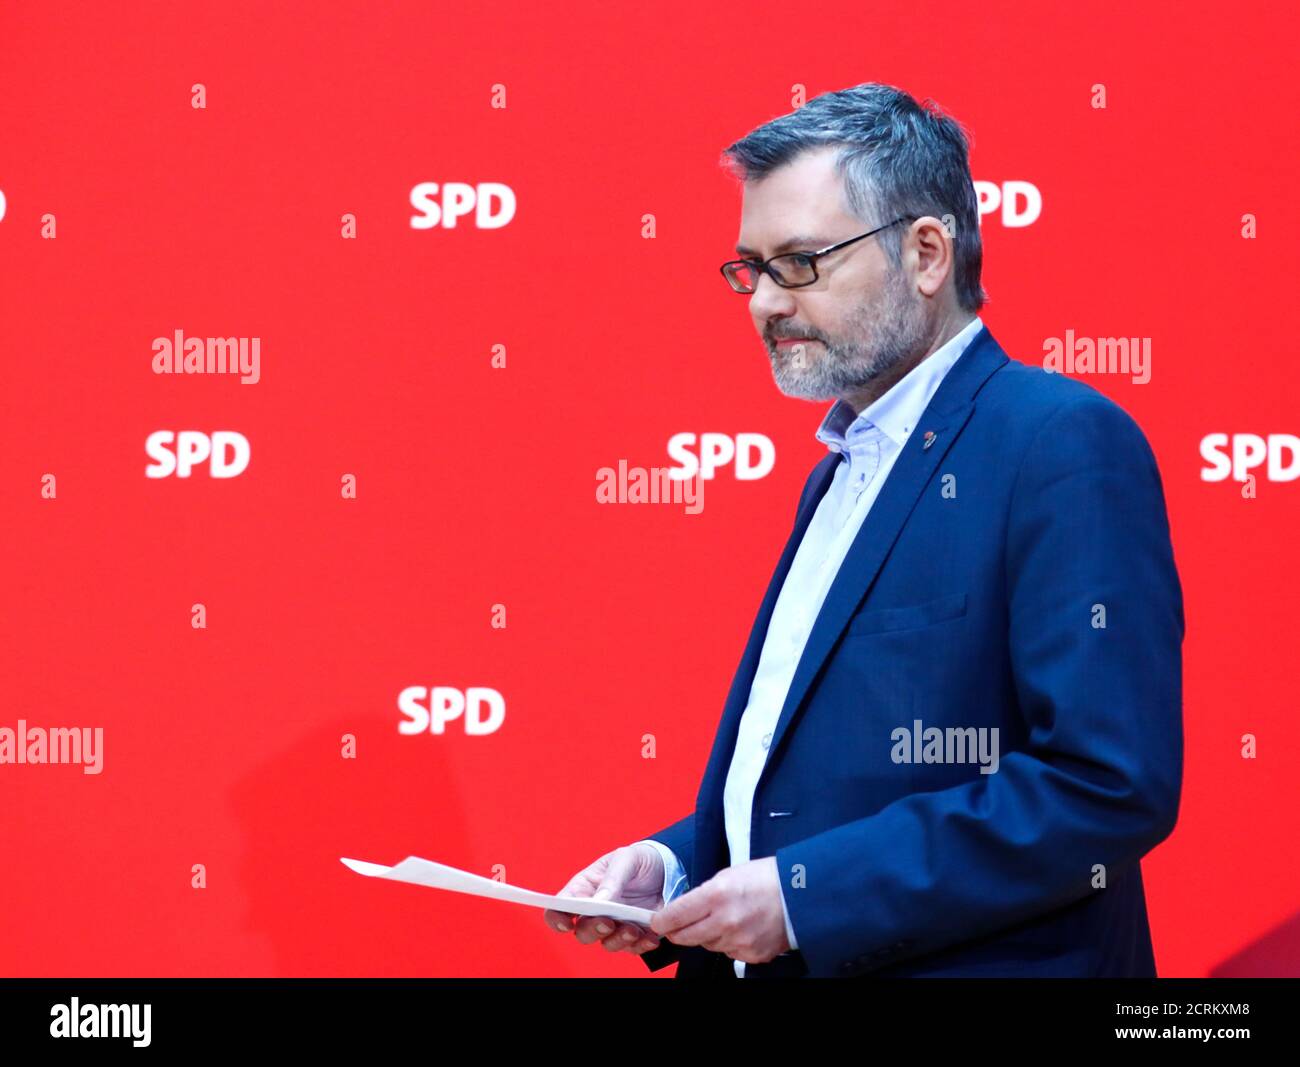 Dietmar Nietan  of Social Democratic Party (SPD) arrives to the news conference to announce the results of the voting for a possible coalition between the Social Democratic Party (SPD) and the Christian Democratic Union (CDU) in Berlin, Germany March 4, 2018. REUTERS/Hannibal Hanschke Stock Photo